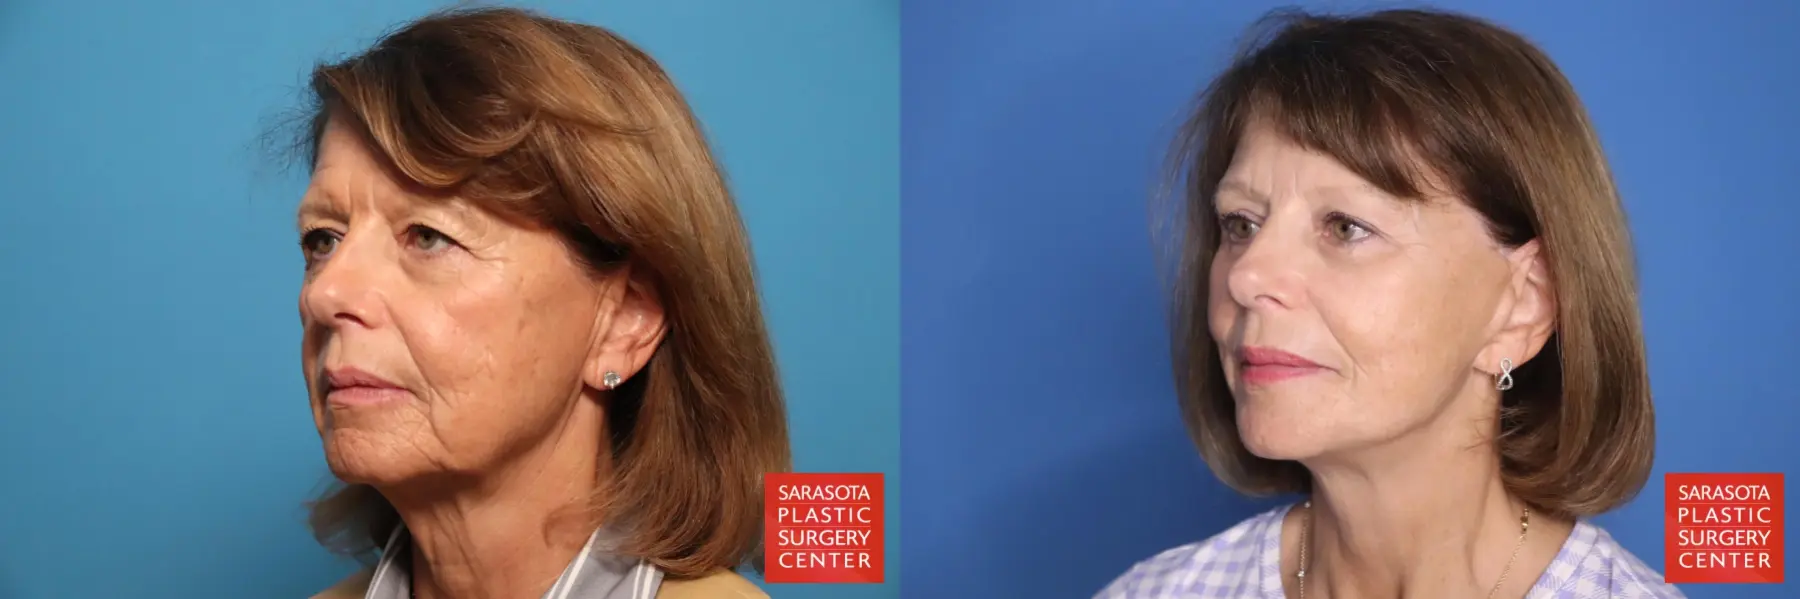 Facelift: Patient 66 - Before and After 2